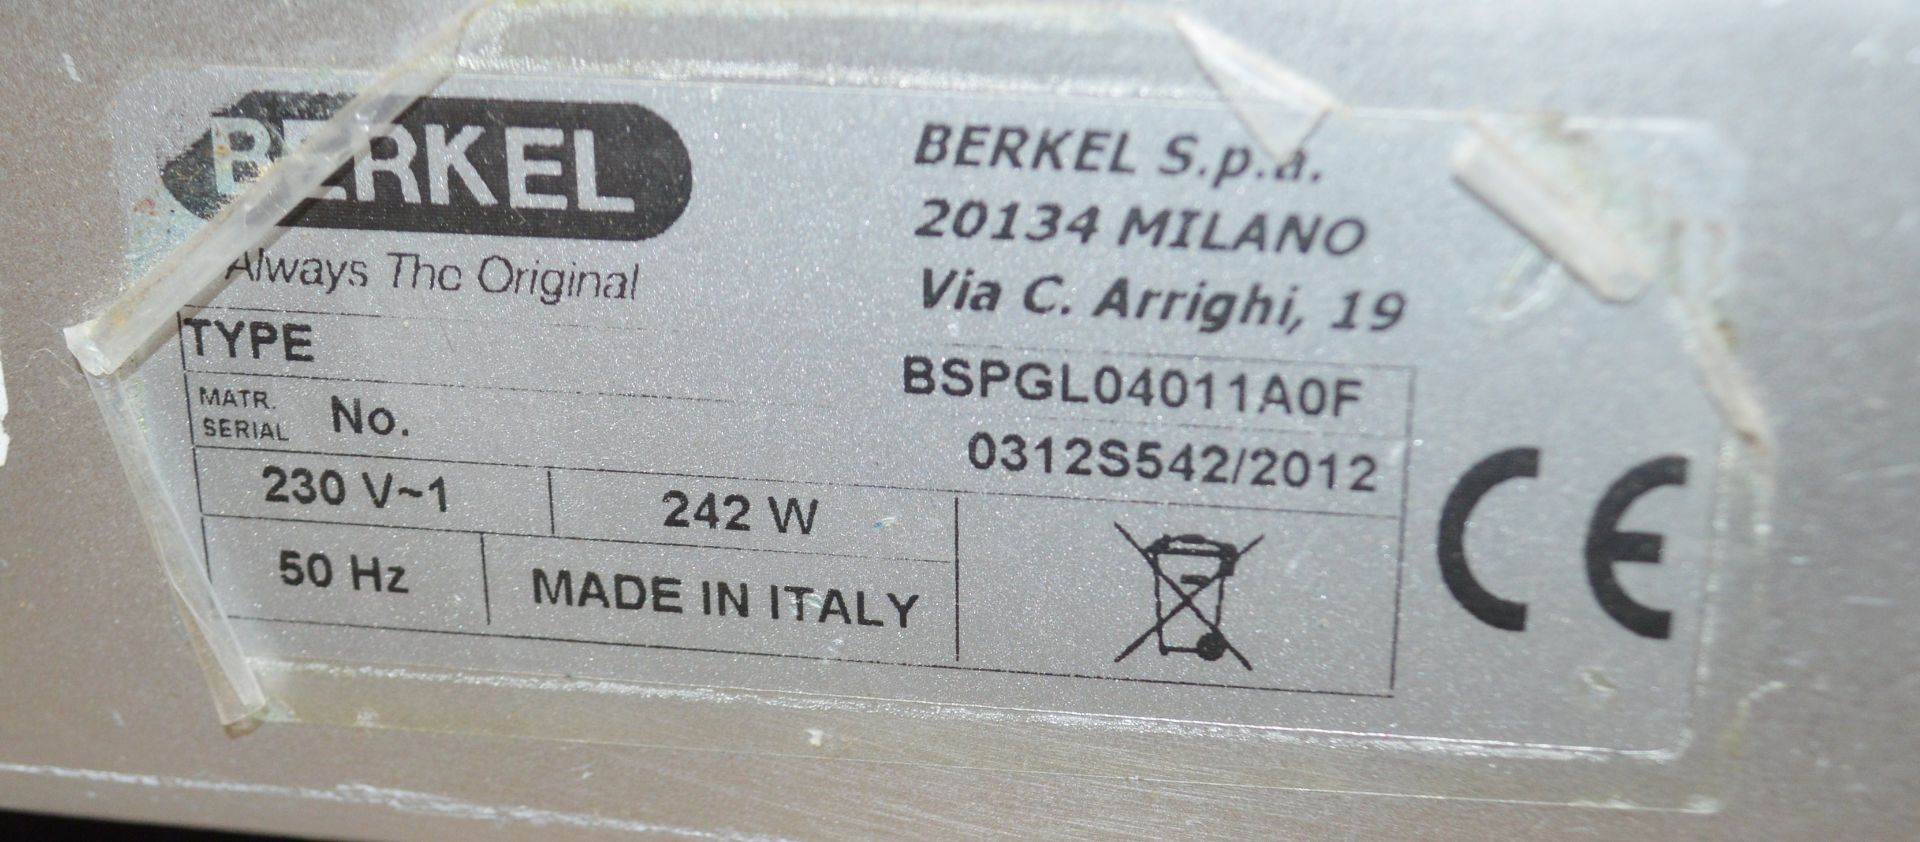 1 x Berkel 12" Commercial Cooked Meat / Bacon Slicer - 220-240v - Model BSPGL04011A0F - Approx - Image 4 of 4